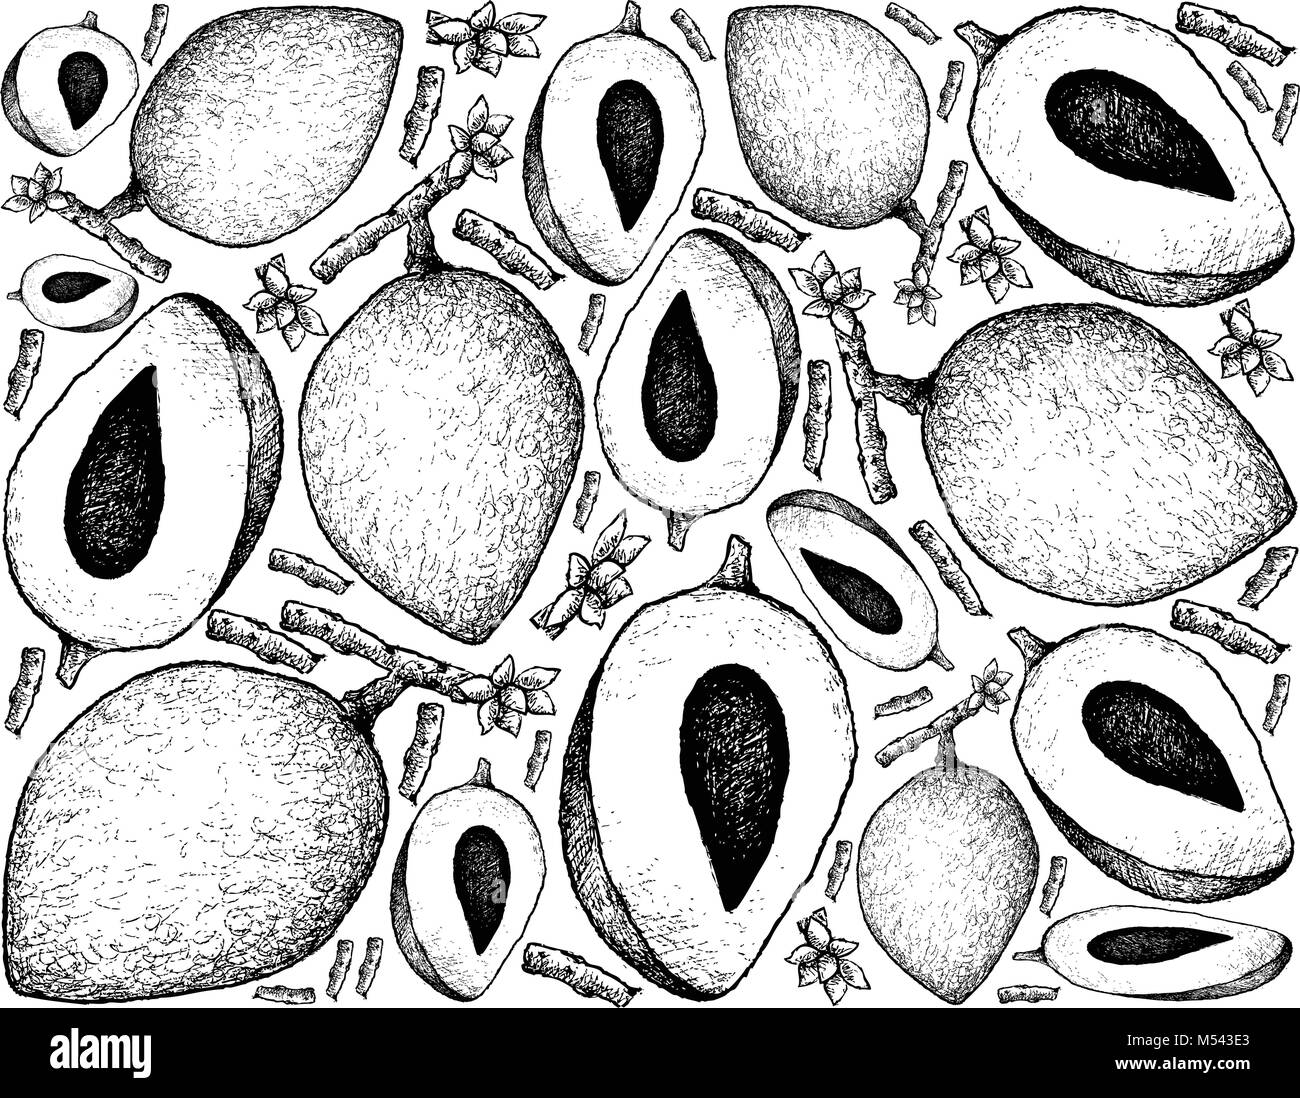 Tropical Fruits, Illustration Wallpaper Background of Hand Drawn Sketch Mamey Sapote or Pouteria Sapota Fruit. Stock Vector